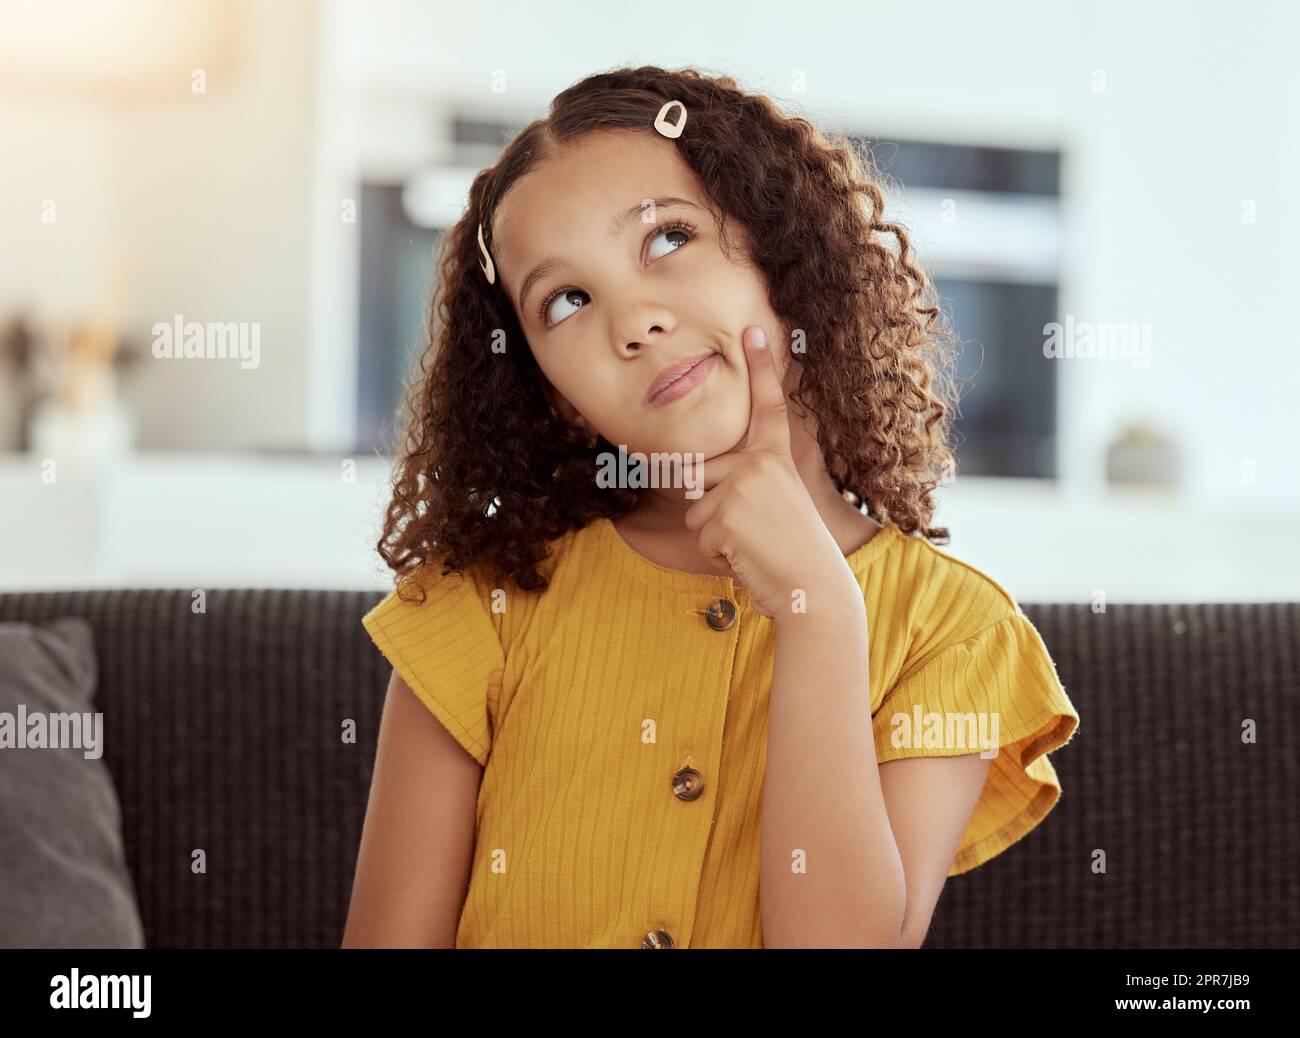 Adorable little mixed race child thinking at home. One small cute hispanic girl sitting alone on a sofa in a living room and coming up with an idea. Bored young kid with curly hair with a solution Stock Photo